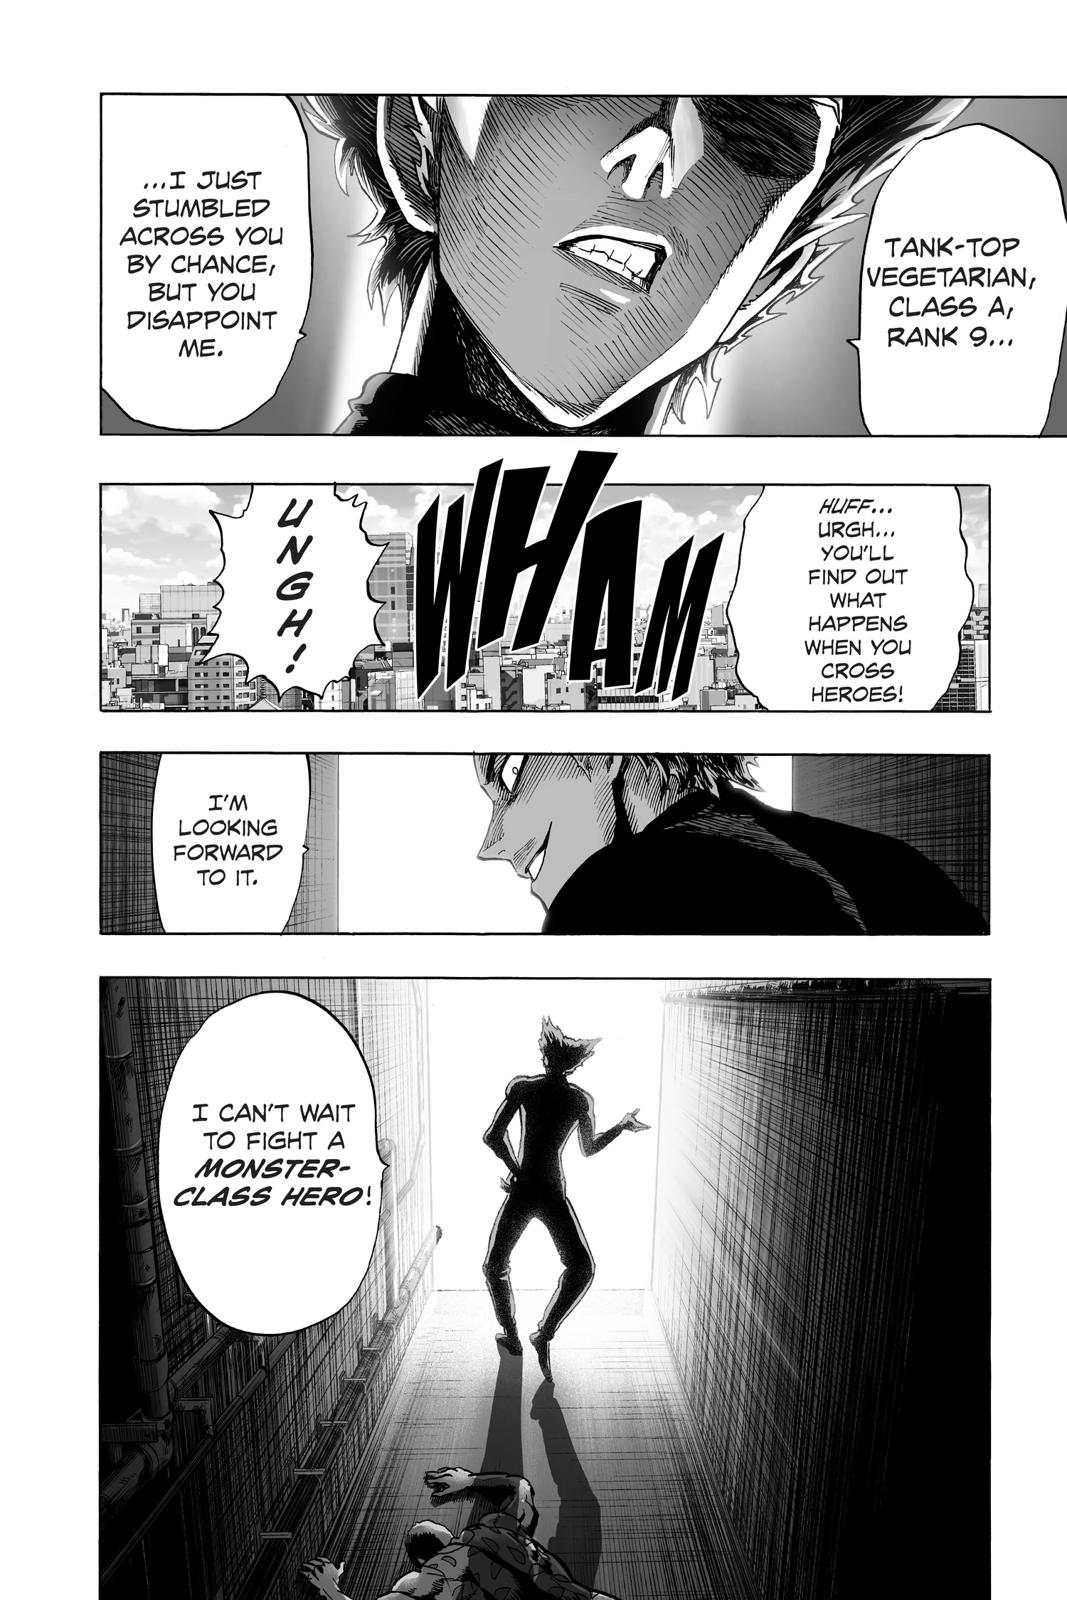 One-Punch Man, Punch 45 image 24